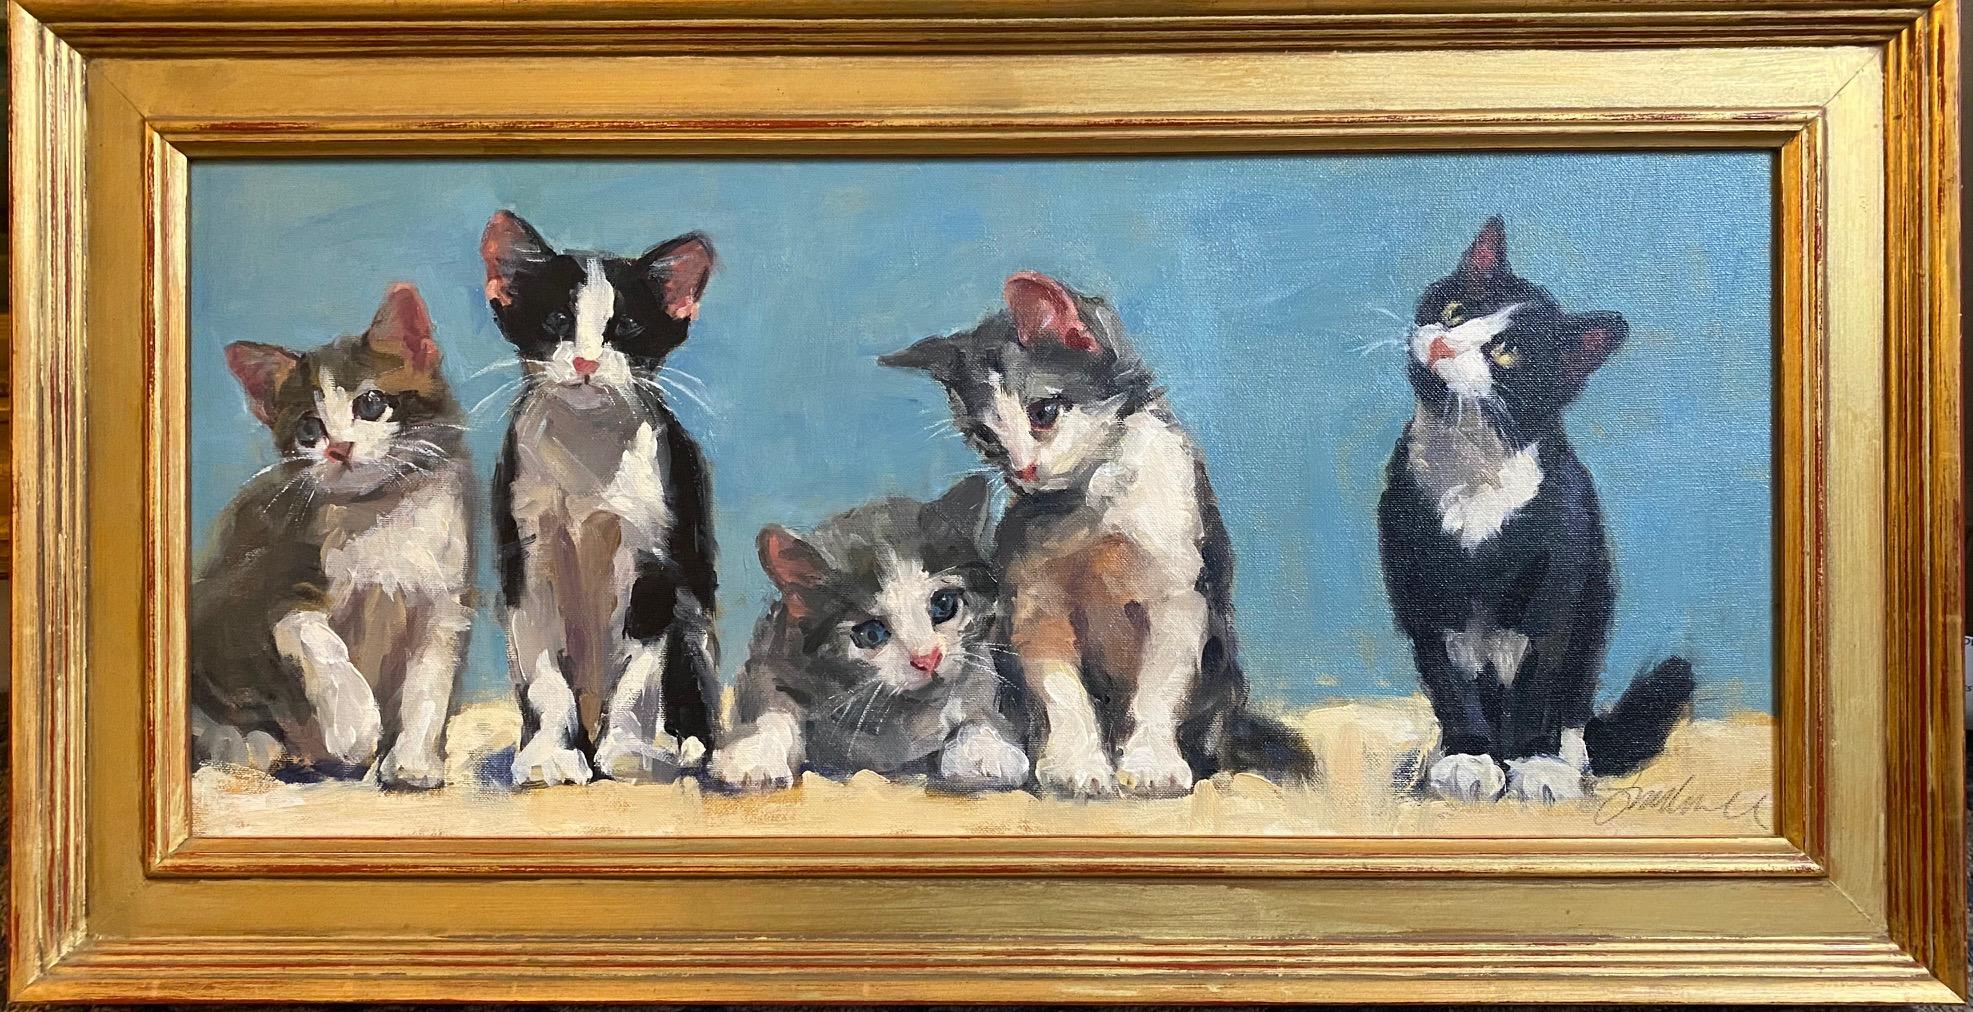 Joseph Sundwall Figurative Painting - Spider on the Ceiling, original contemporary figurative landscape of kittens